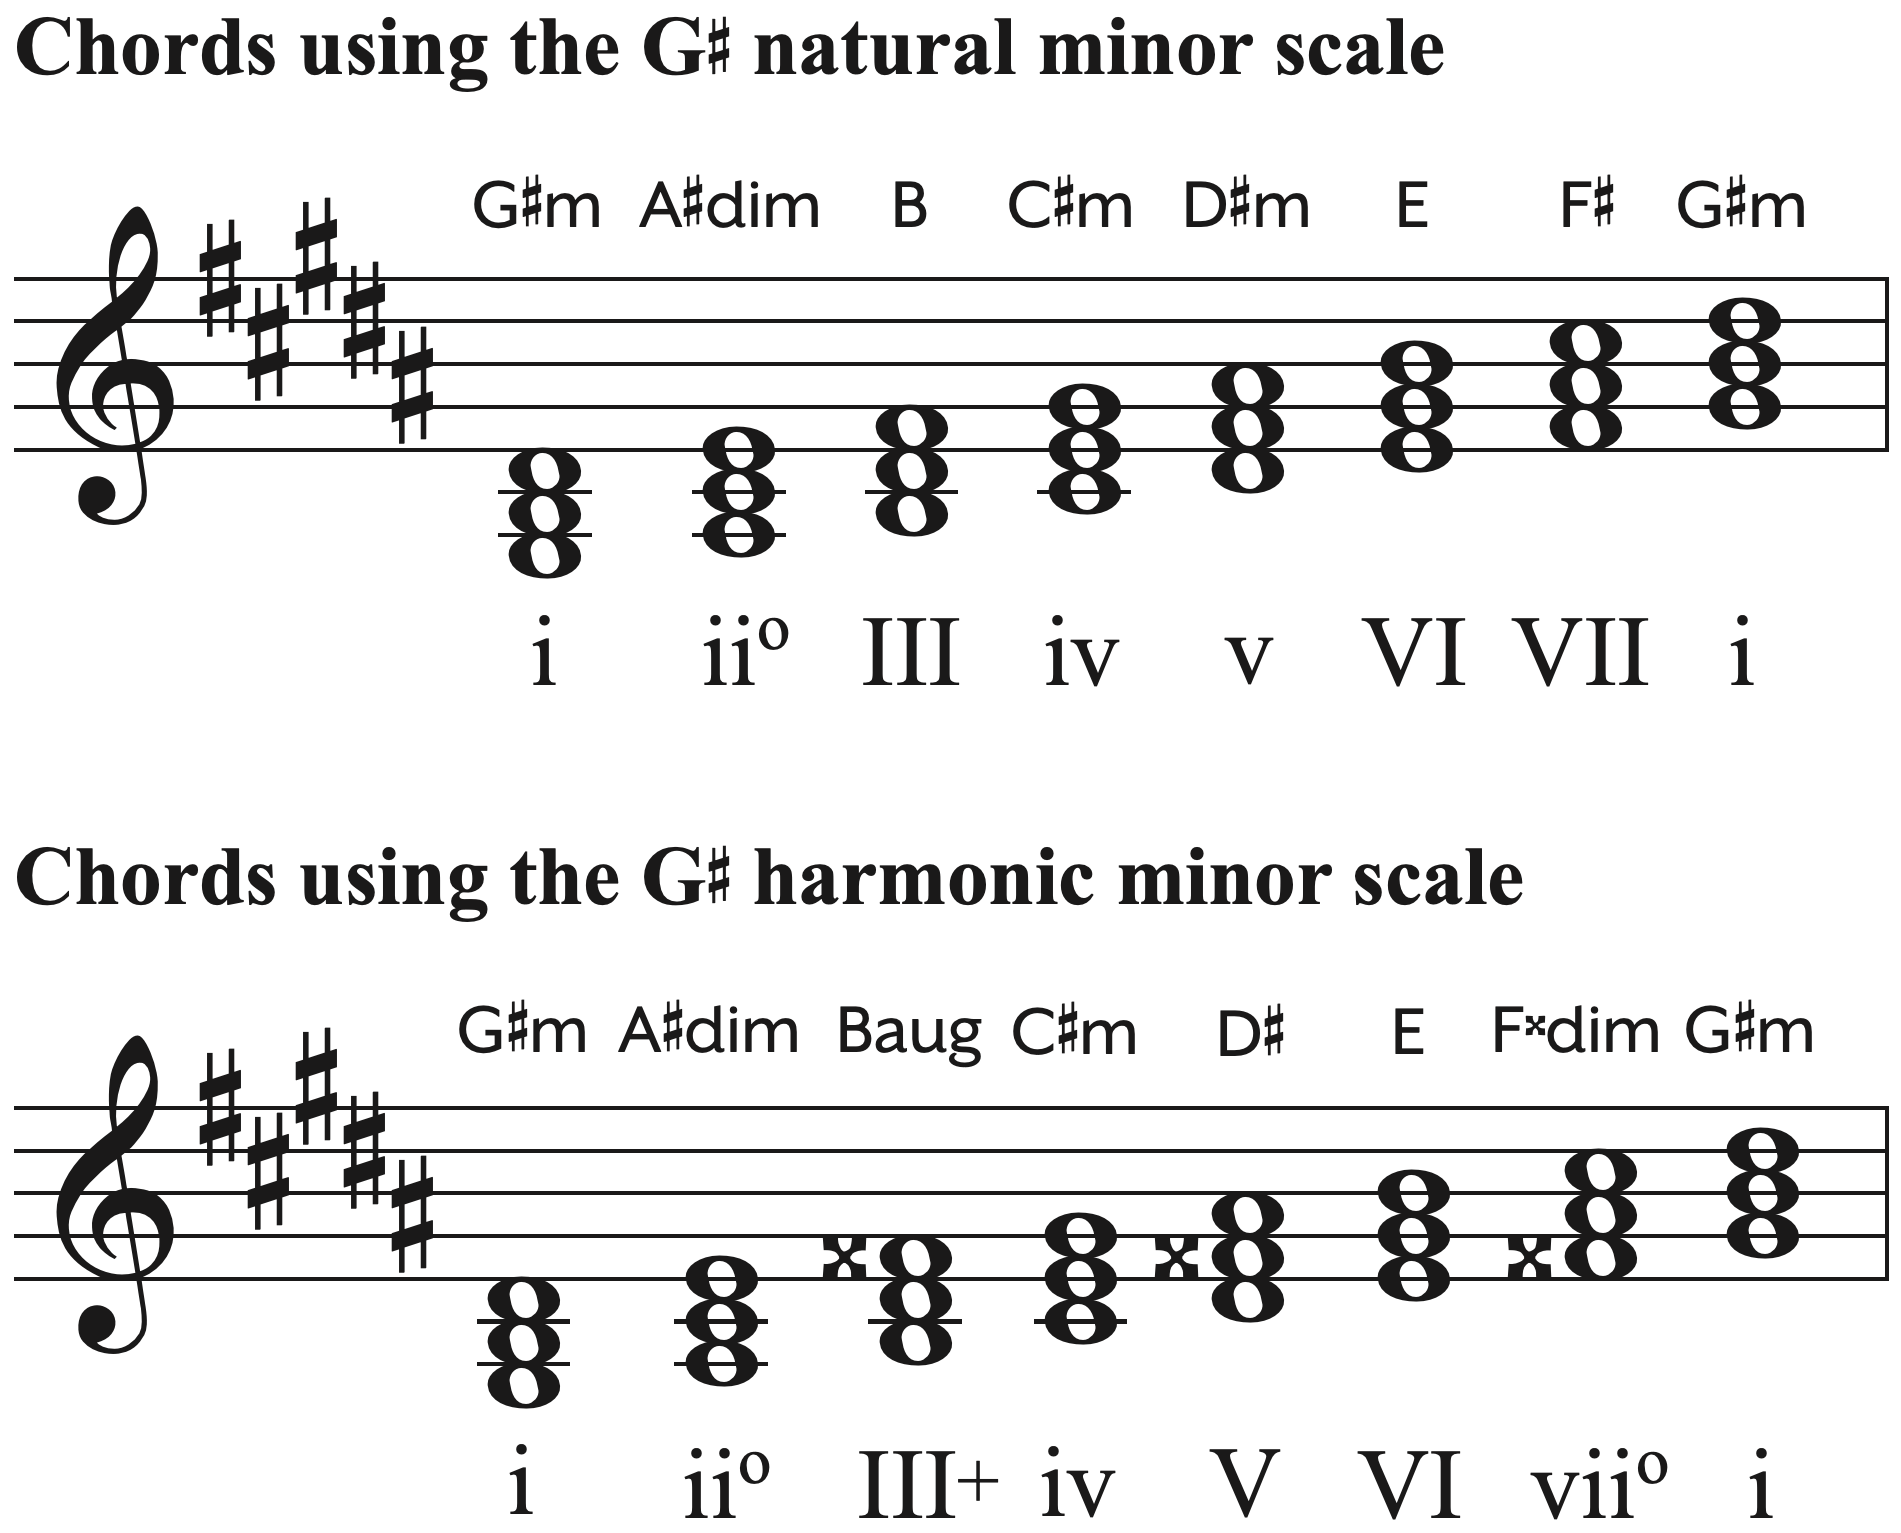 Chords using the G-sharp minor scale